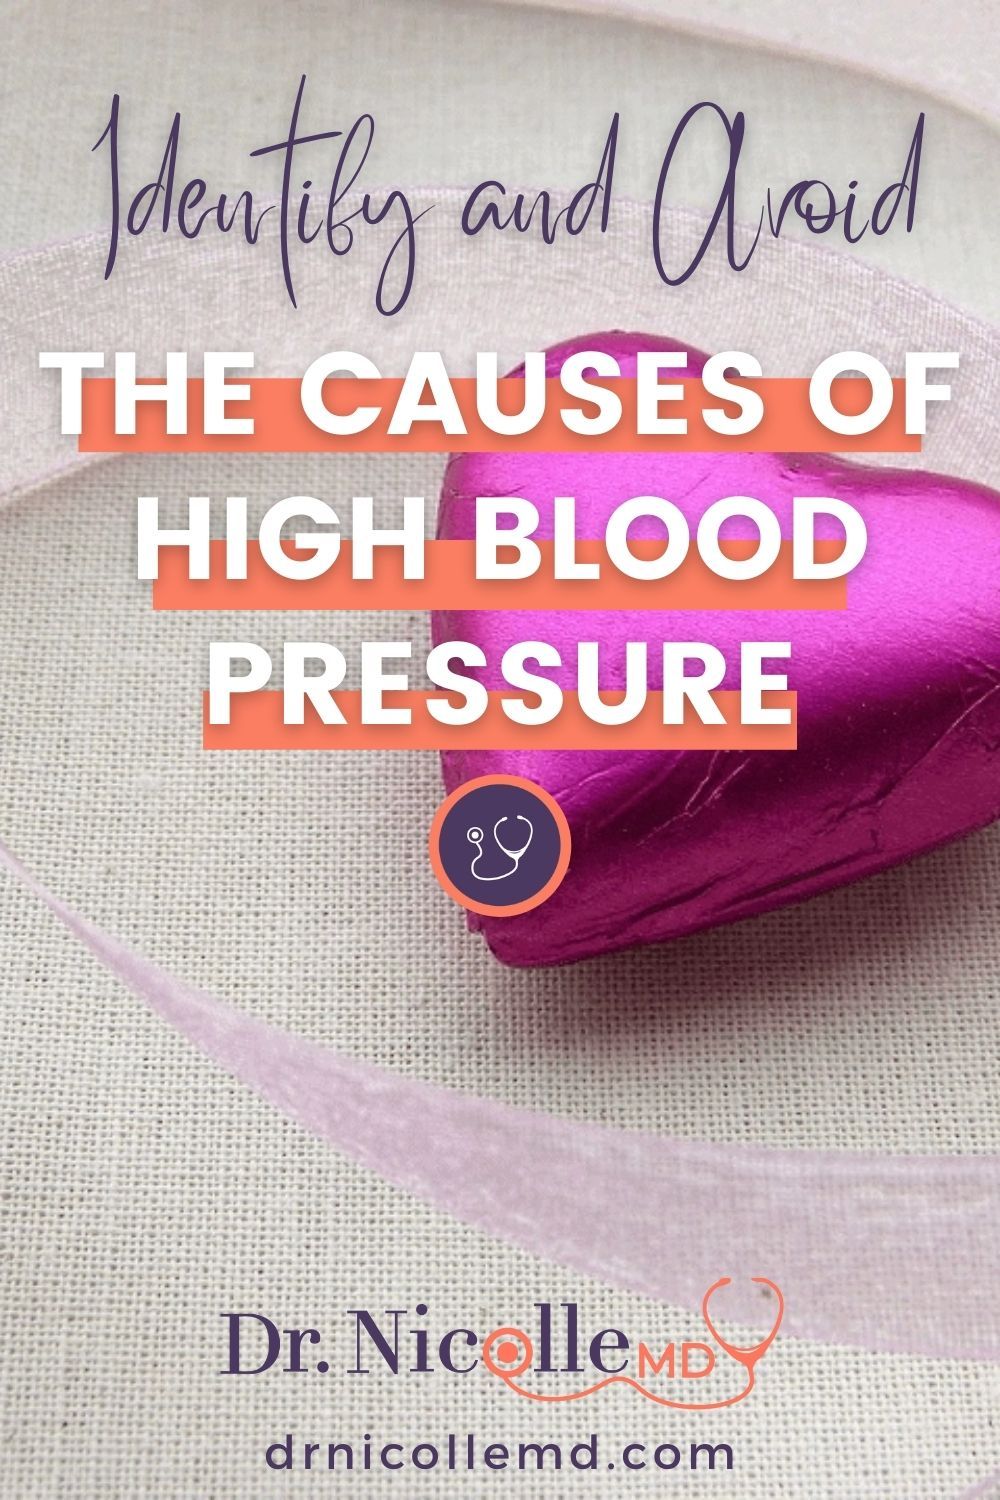 Identify and Avoid the Causes of High Blood Pressure